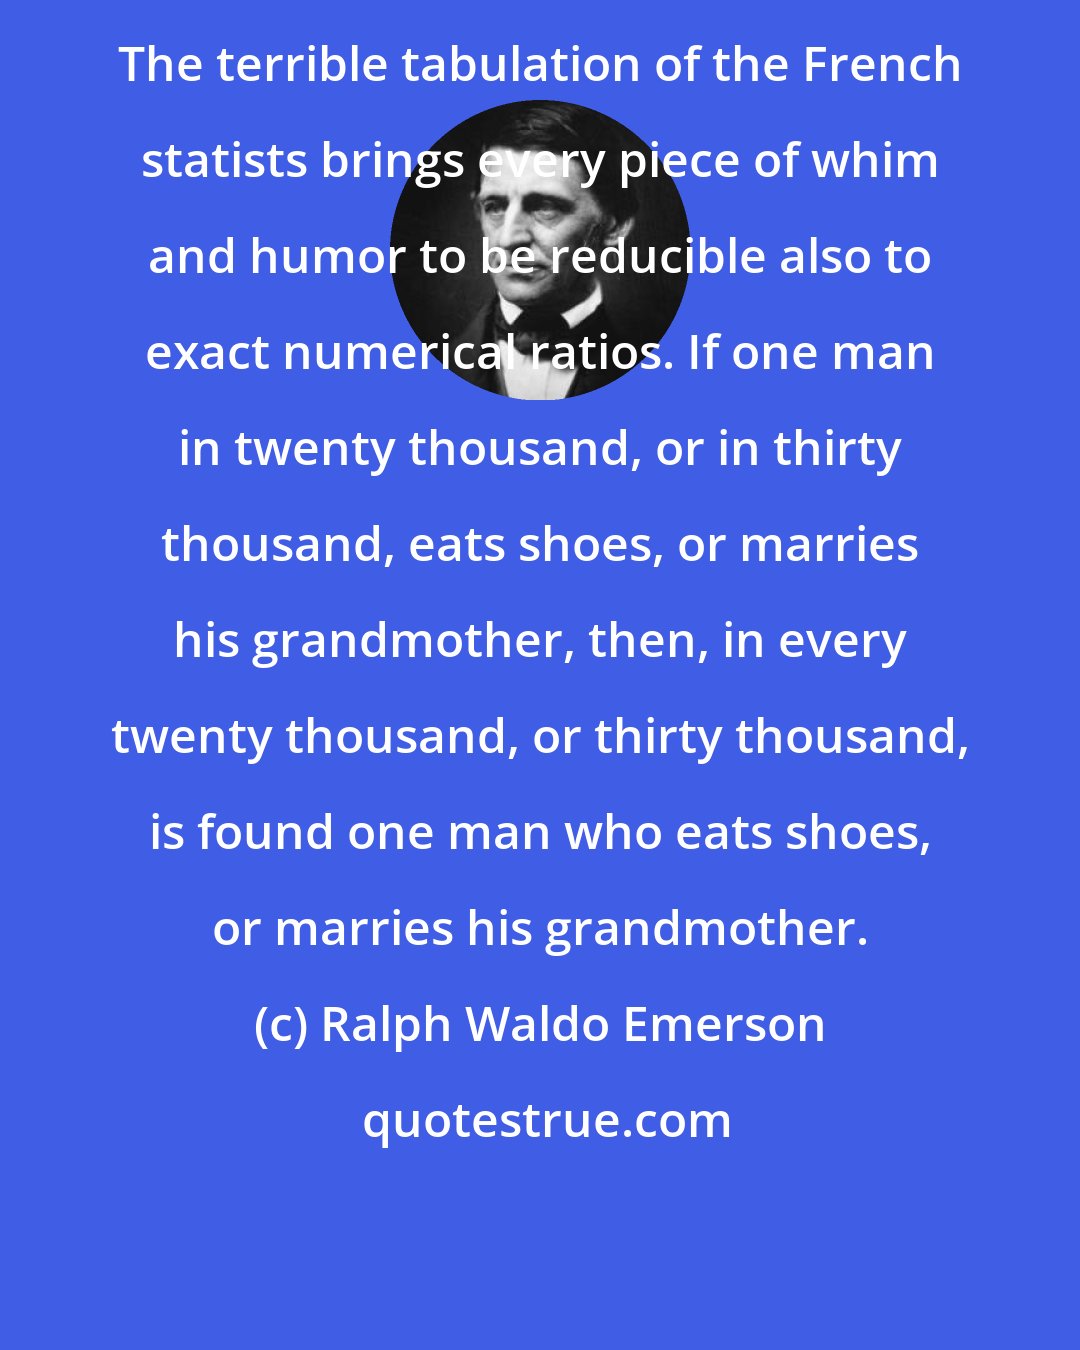 Ralph Waldo Emerson: The terrible tabulation of the French statists brings every piece of whim and humor to be reducible also to exact numerical ratios. If one man in twenty thousand, or in thirty thousand, eats shoes, or marries his grandmother, then, in every twenty thousand, or thirty thousand, is found one man who eats shoes, or marries his grandmother.